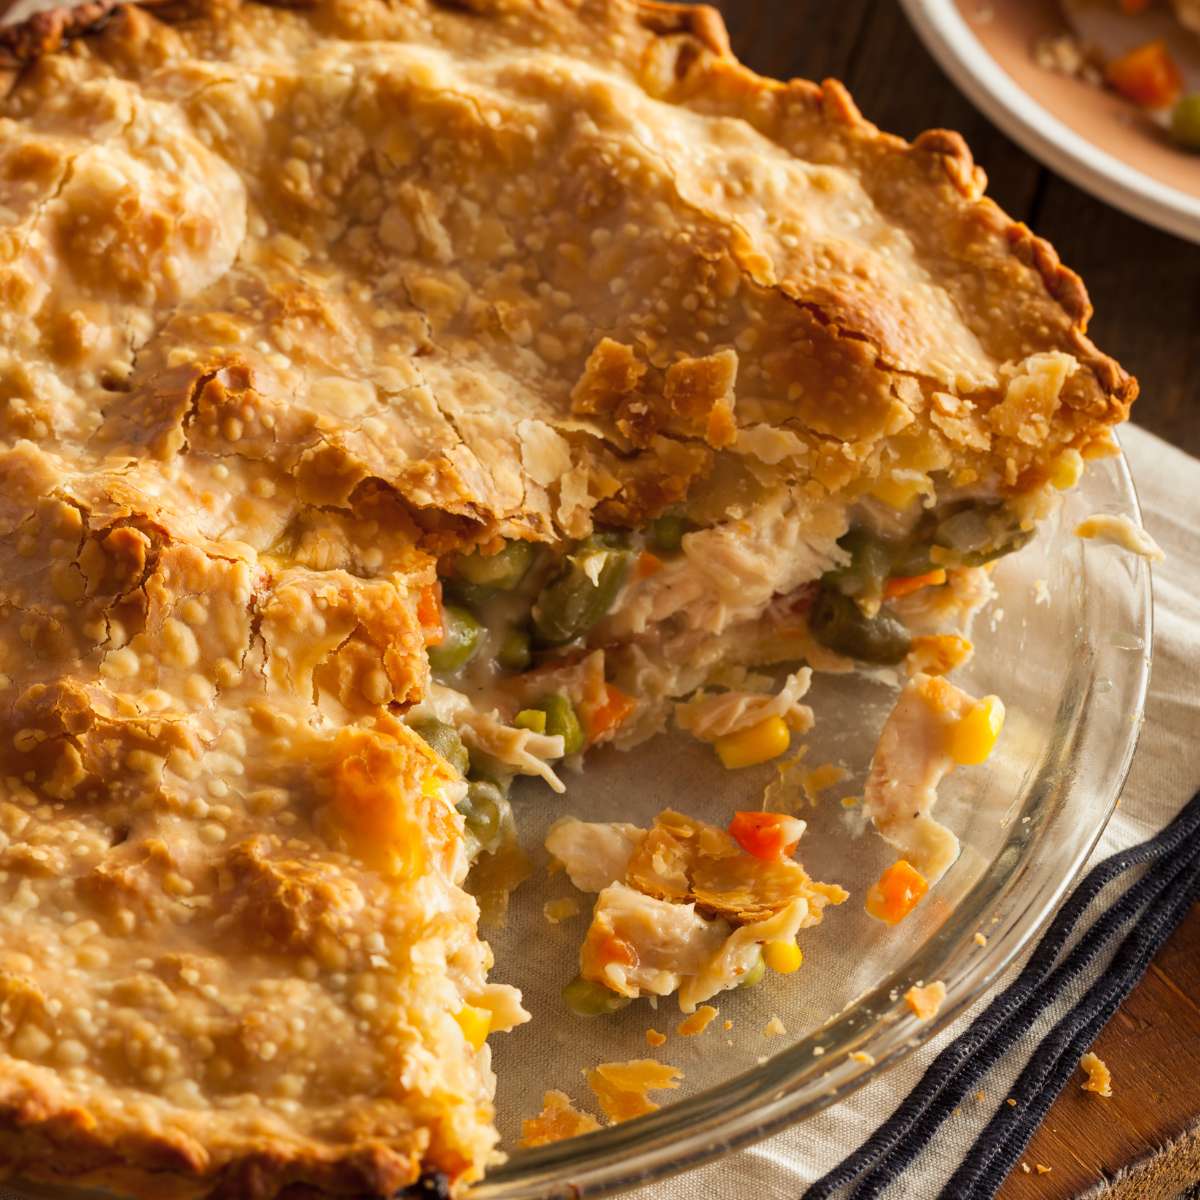 Chicken pot pie on a glass plate, set on a table with a towel